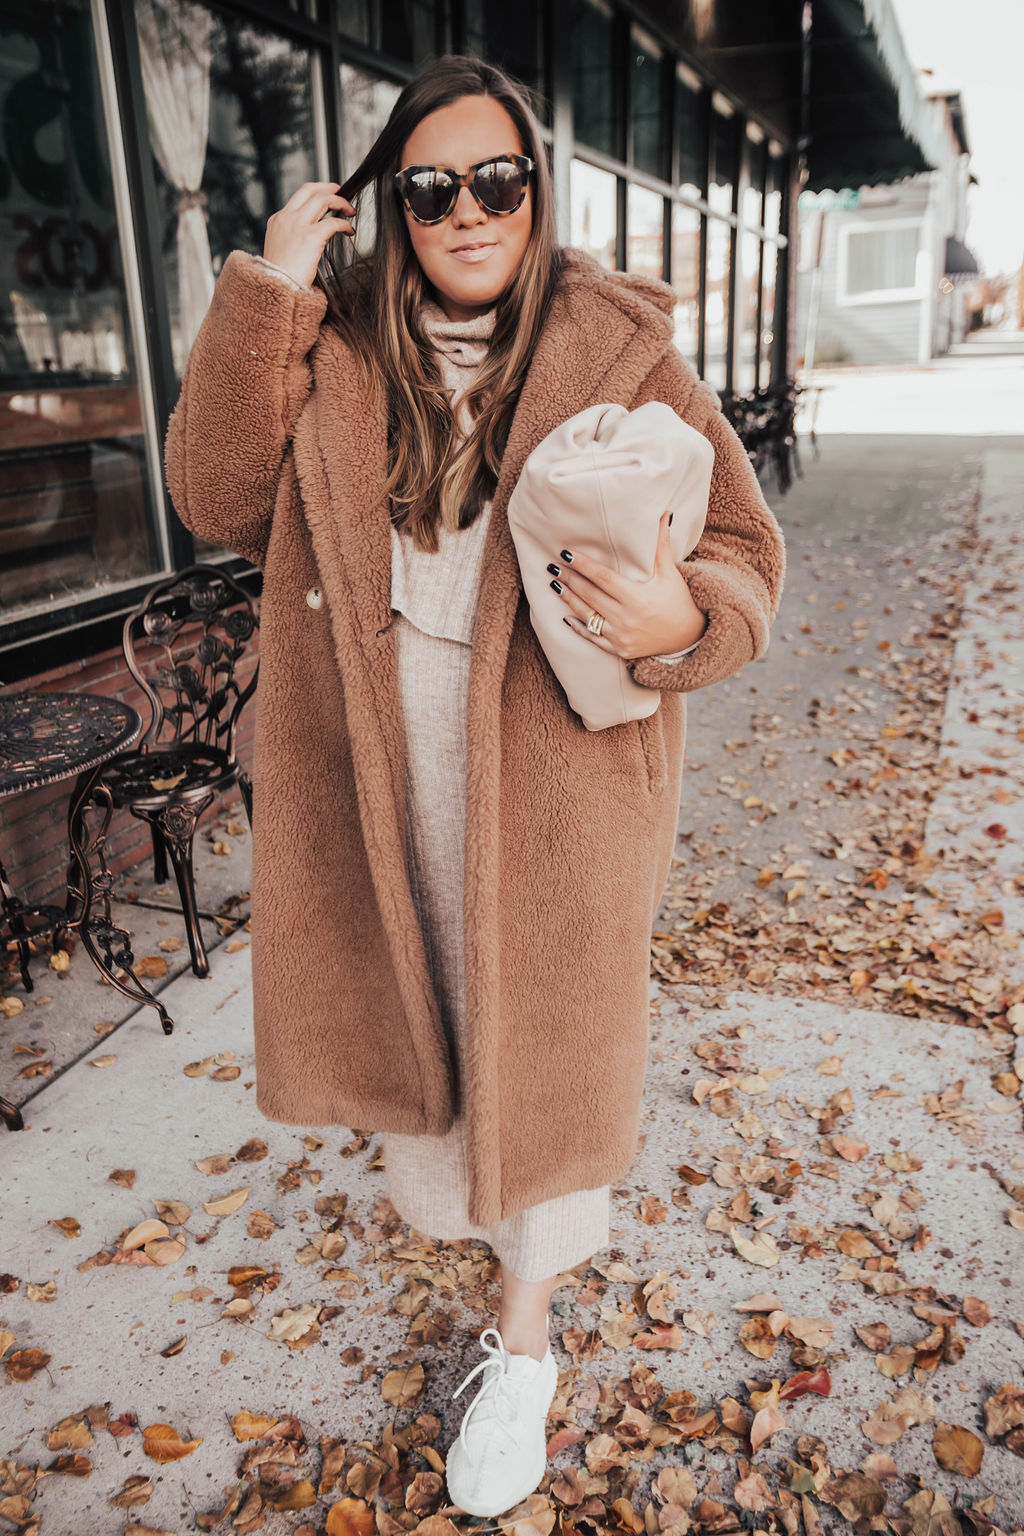 Reno blogger Ashley Zeal from Two Peas in a Prada shares her number one money-saving hack. Learn how she saves for big-ticket designer items and budgets for taxes! 